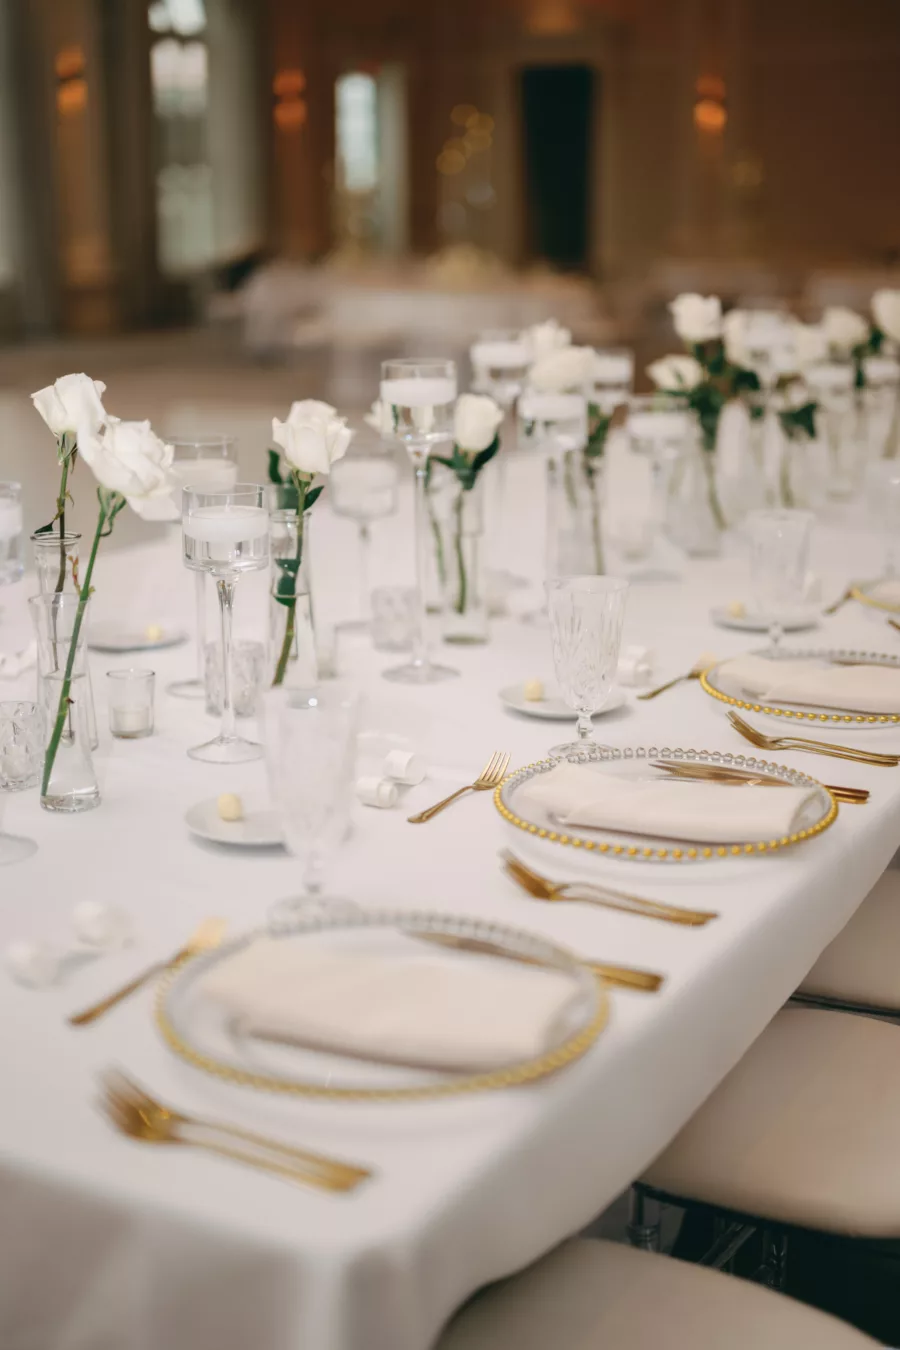 Timeless Monochromatic Wedding Reception Ideas | Romantic Centerpiece and Place Setting Decor Inspiration | Feasting Tables | Floating Candles, Tea Lights, and Individual White Roses in Tall Bud Vases | Gold Beaded Chargers and Flatware